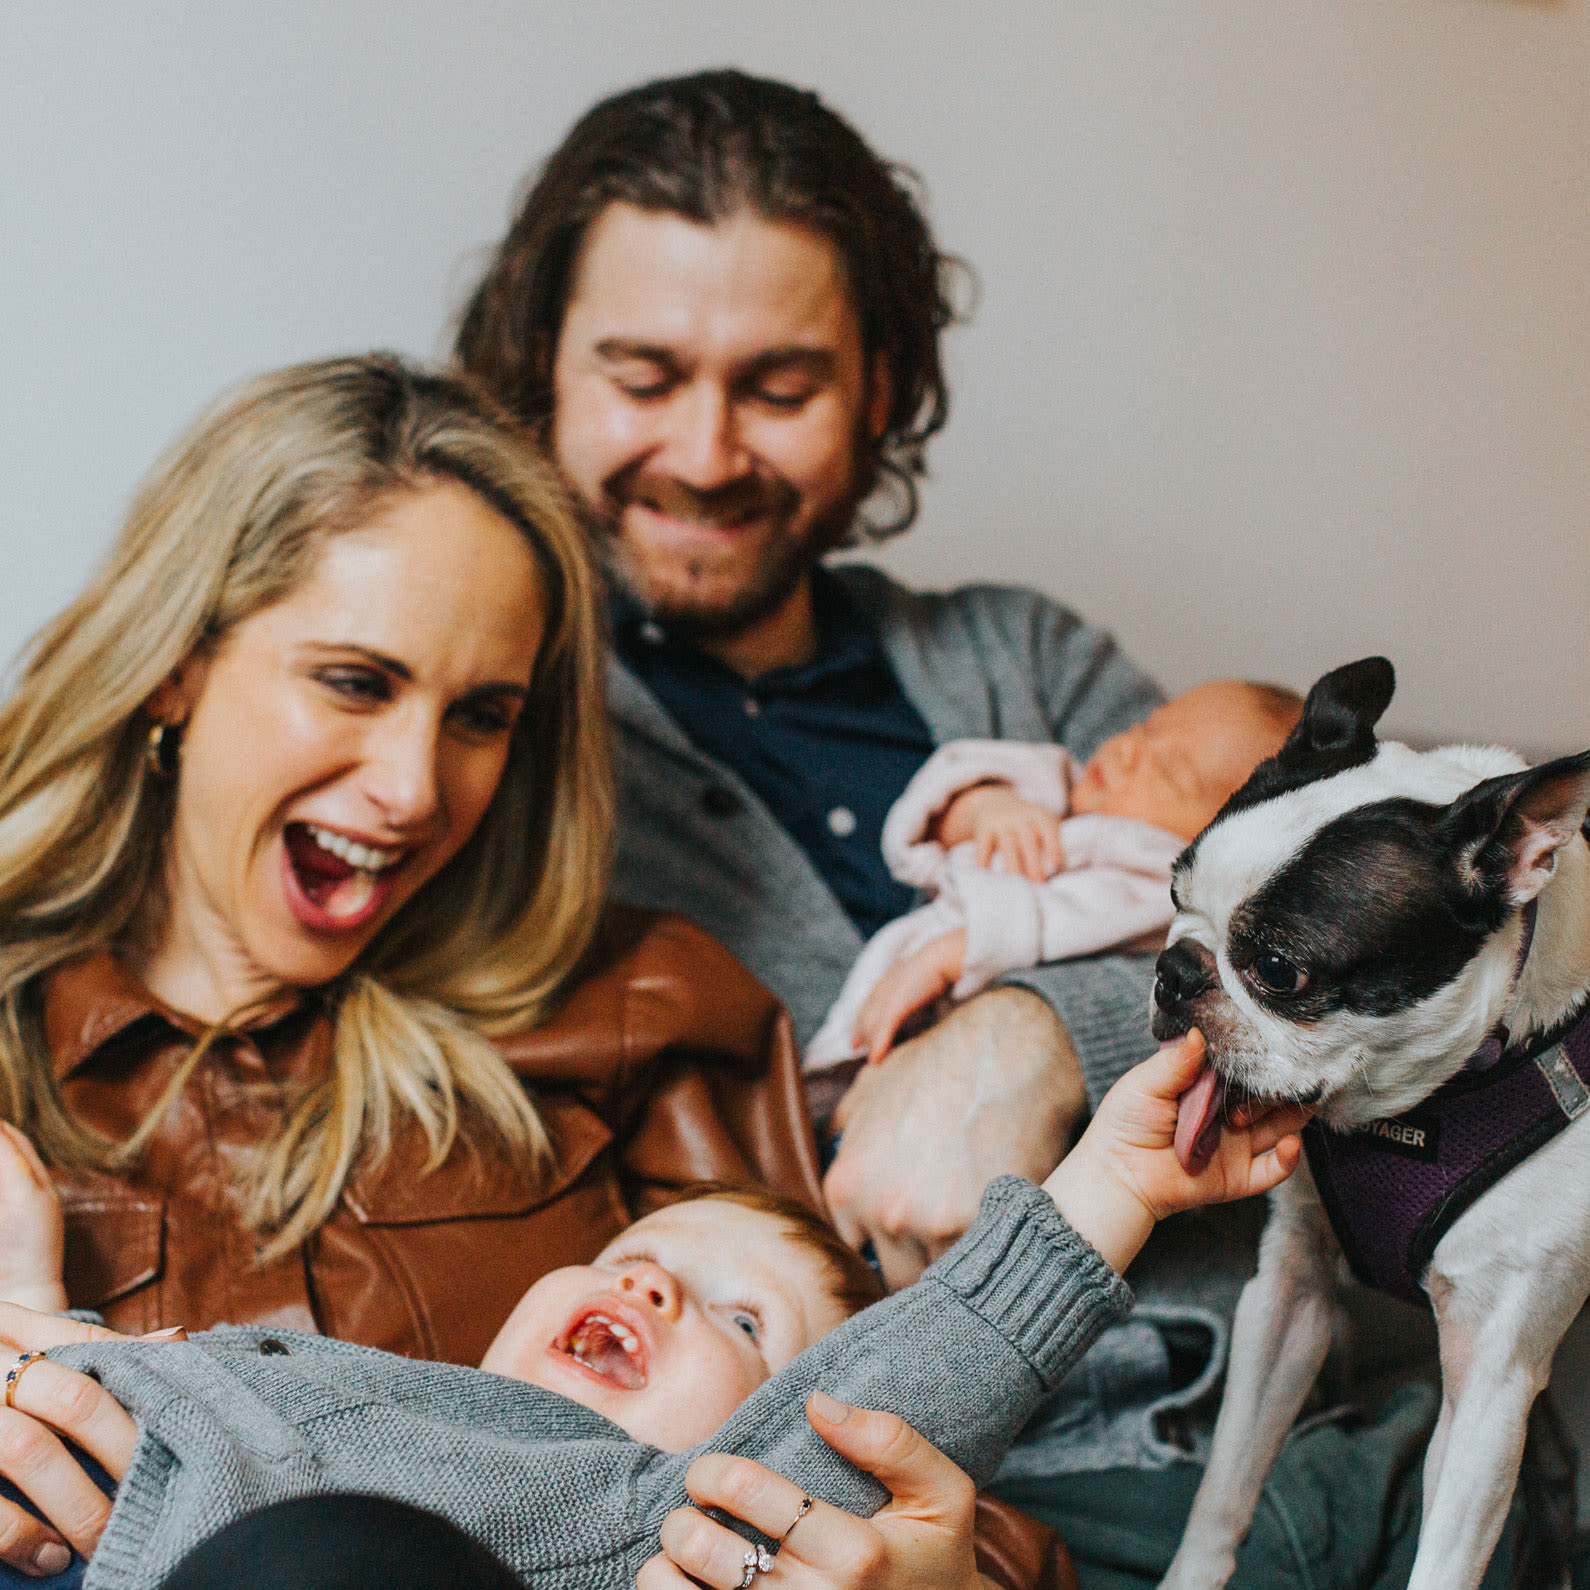 Veracity founder, Allie Egan laughing with her family